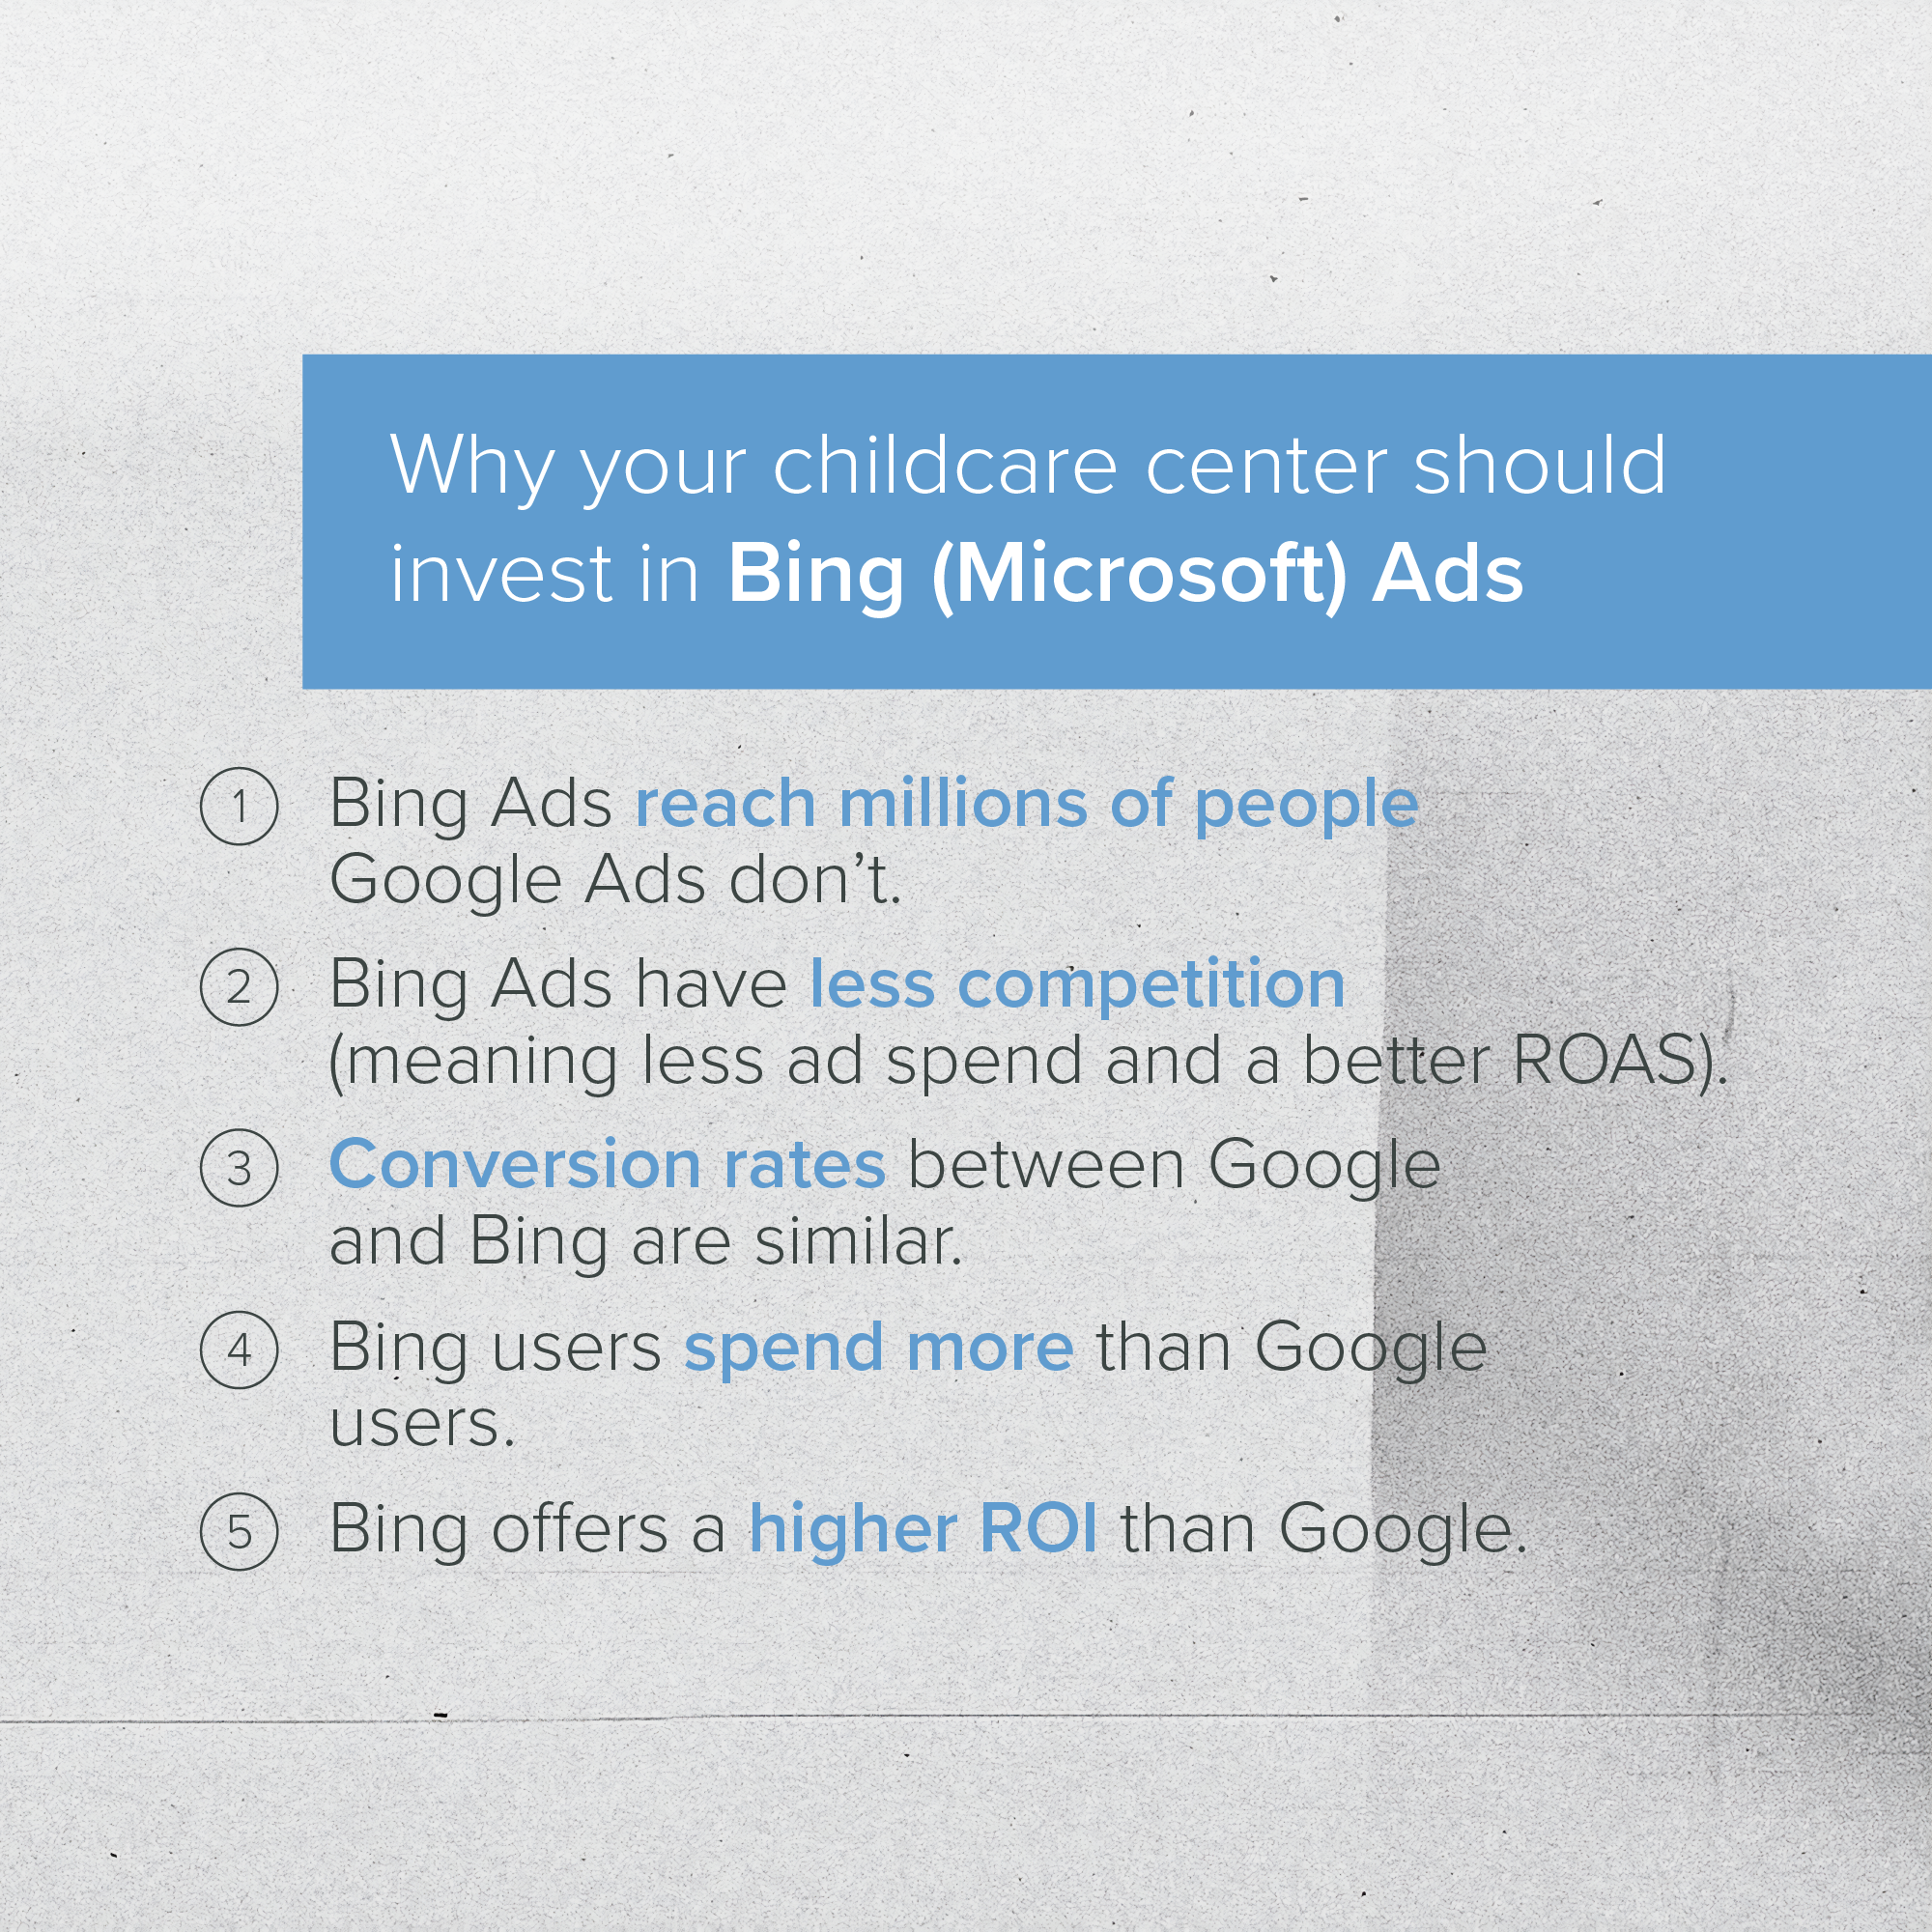 Infographic: Why Bing (Microsoft) Ads Are a Good Idea for Your Childcare Center